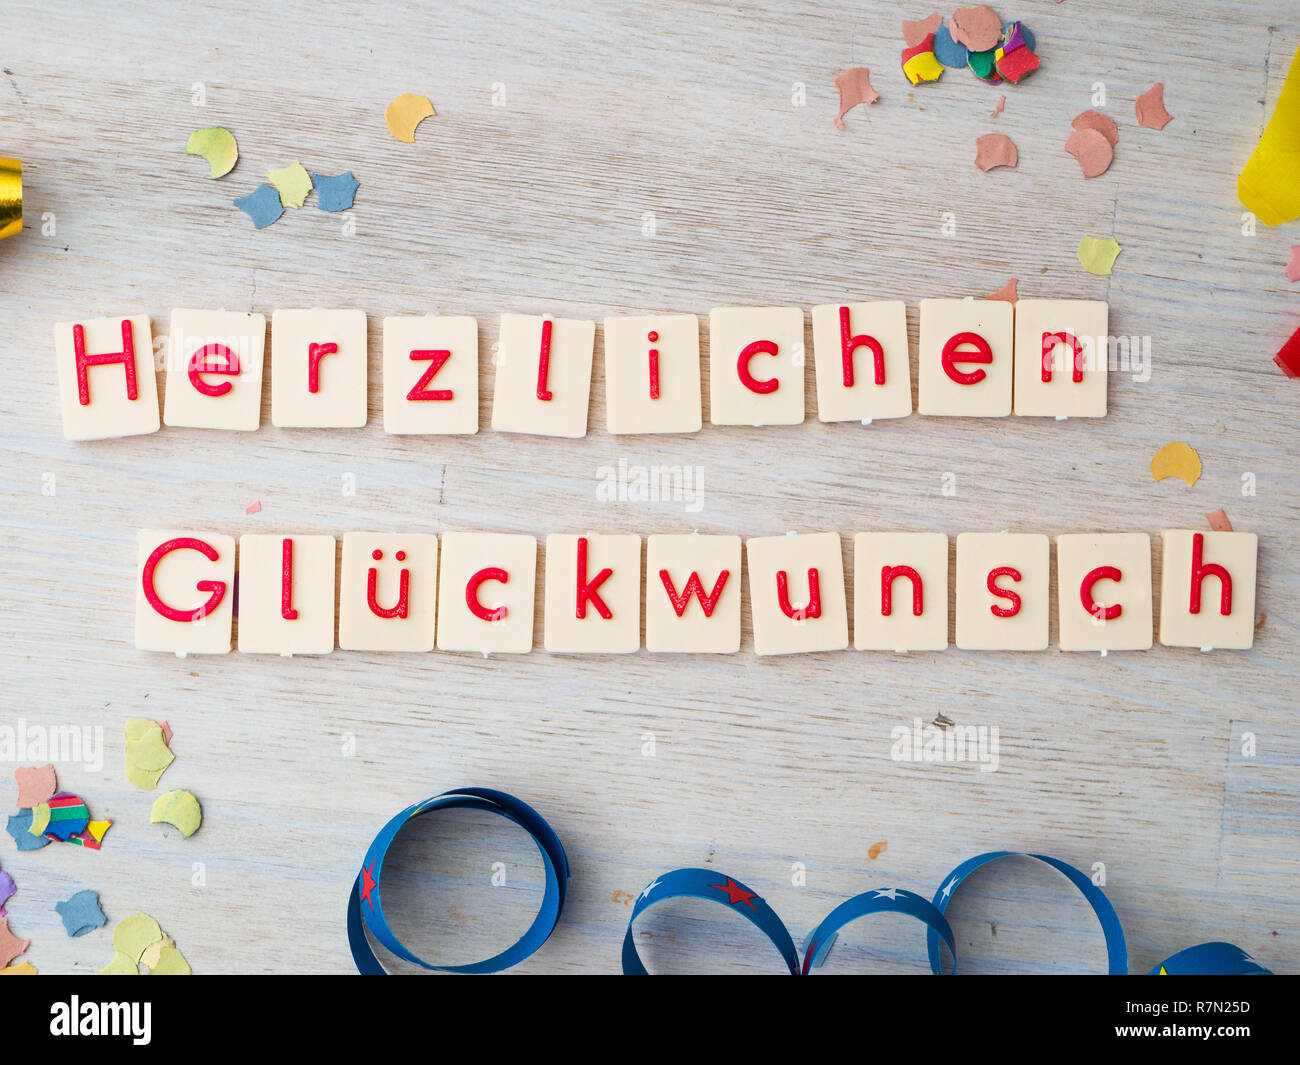 Herzlichen Glückwunsch (congratulations) lettering with party supplies on wooden background, concept image Stock Photo